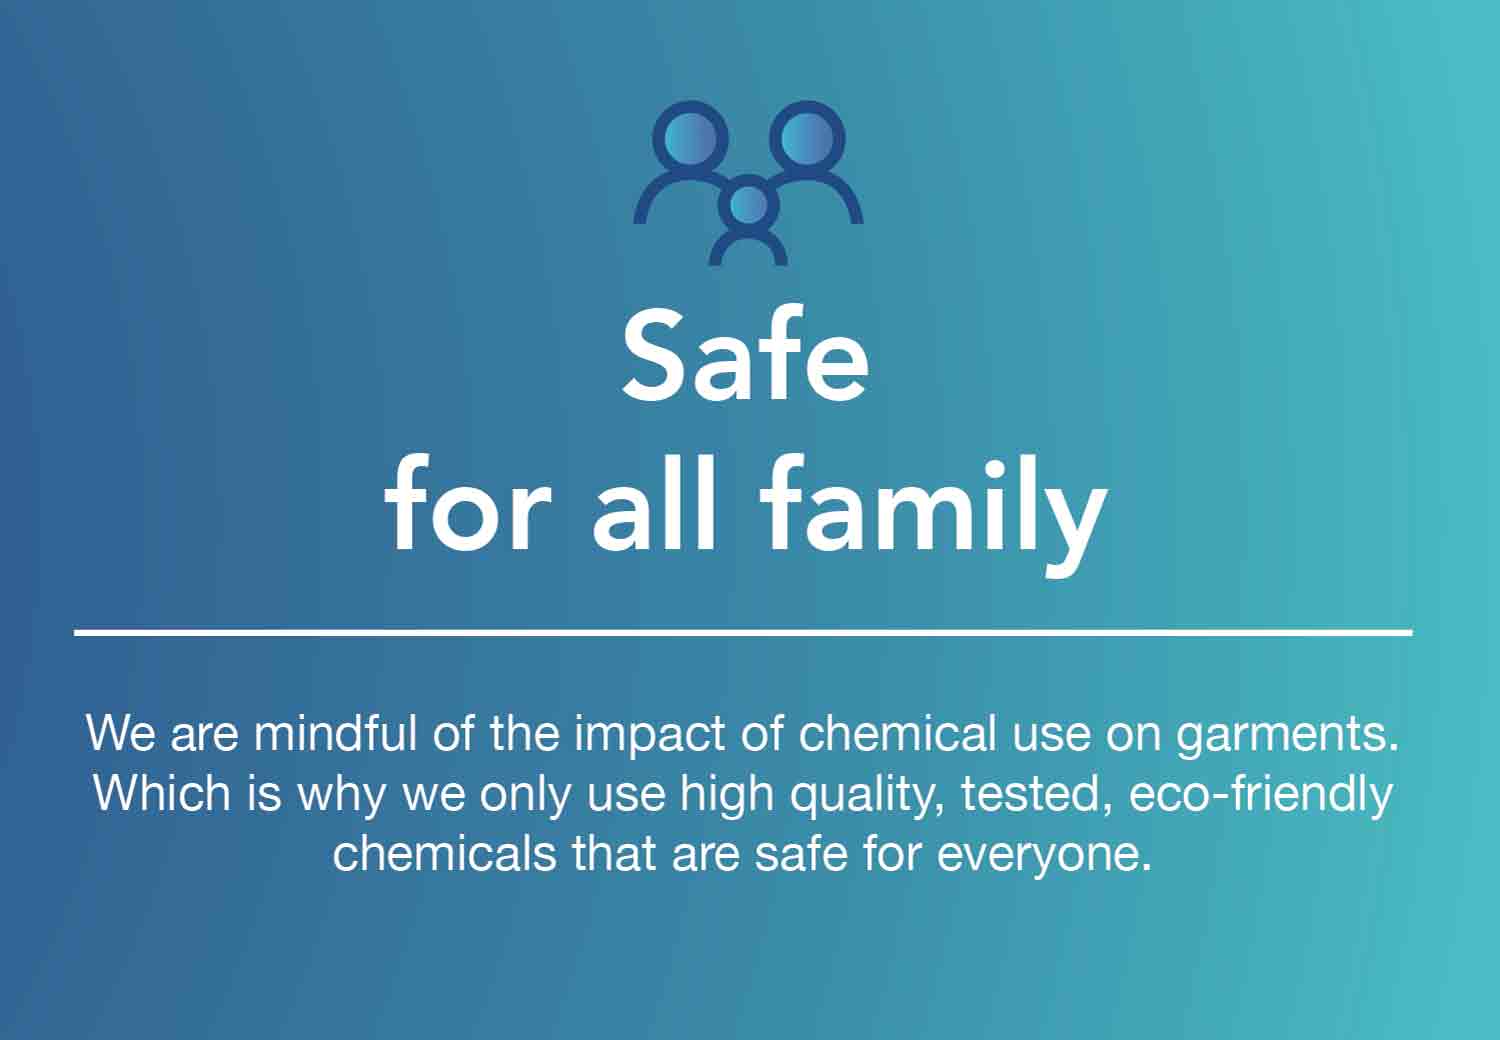 Safe For the family. It is every mother priority to ensure her family always be given the best, especially in things concerning health. We at Puro Fabricare, are well eqquiped with chemicals that are profen safe for highly sensitive skin, child with allergies, and even for your babies.